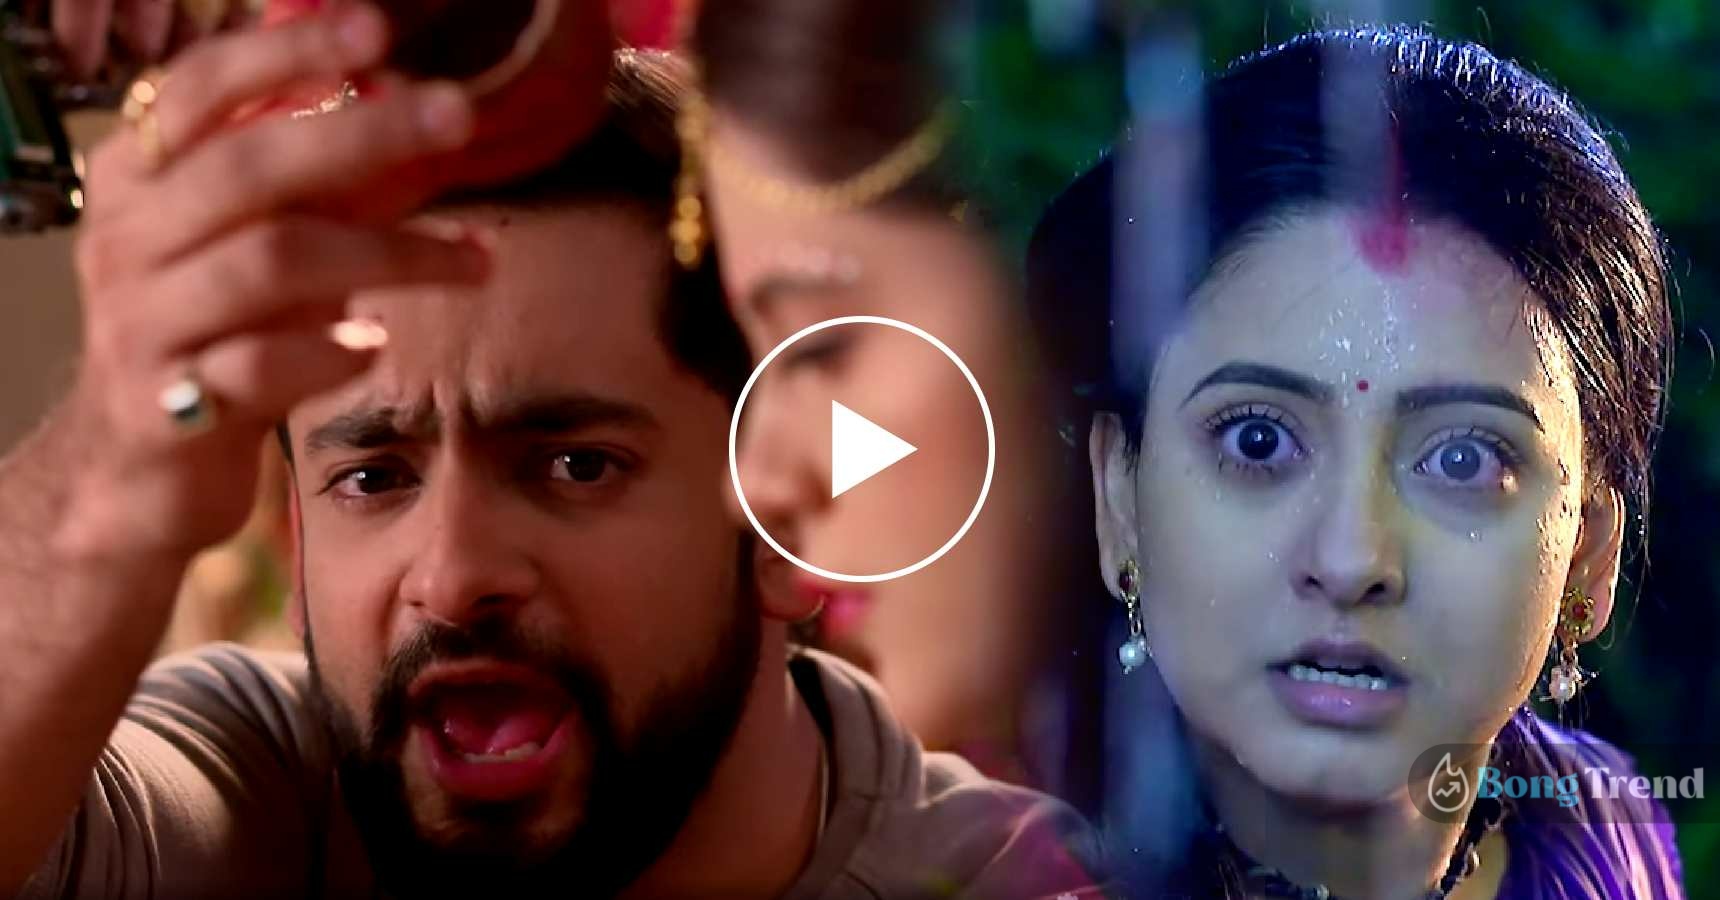 Madhabilata serial new promo comes out